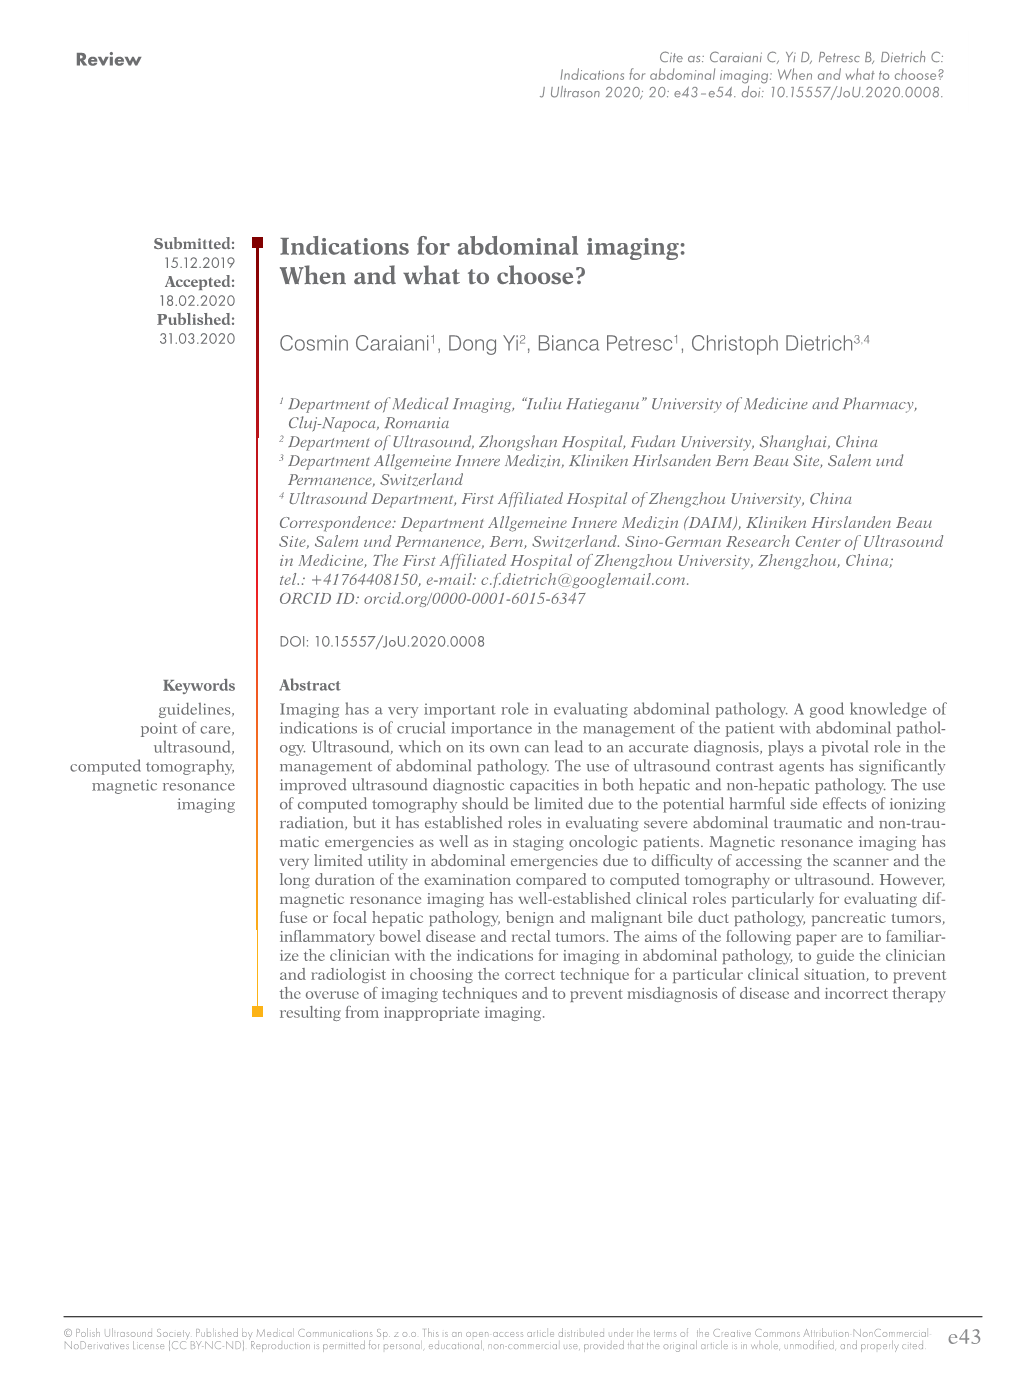 Indications for Abdominal Imaging: When and What to Choose?